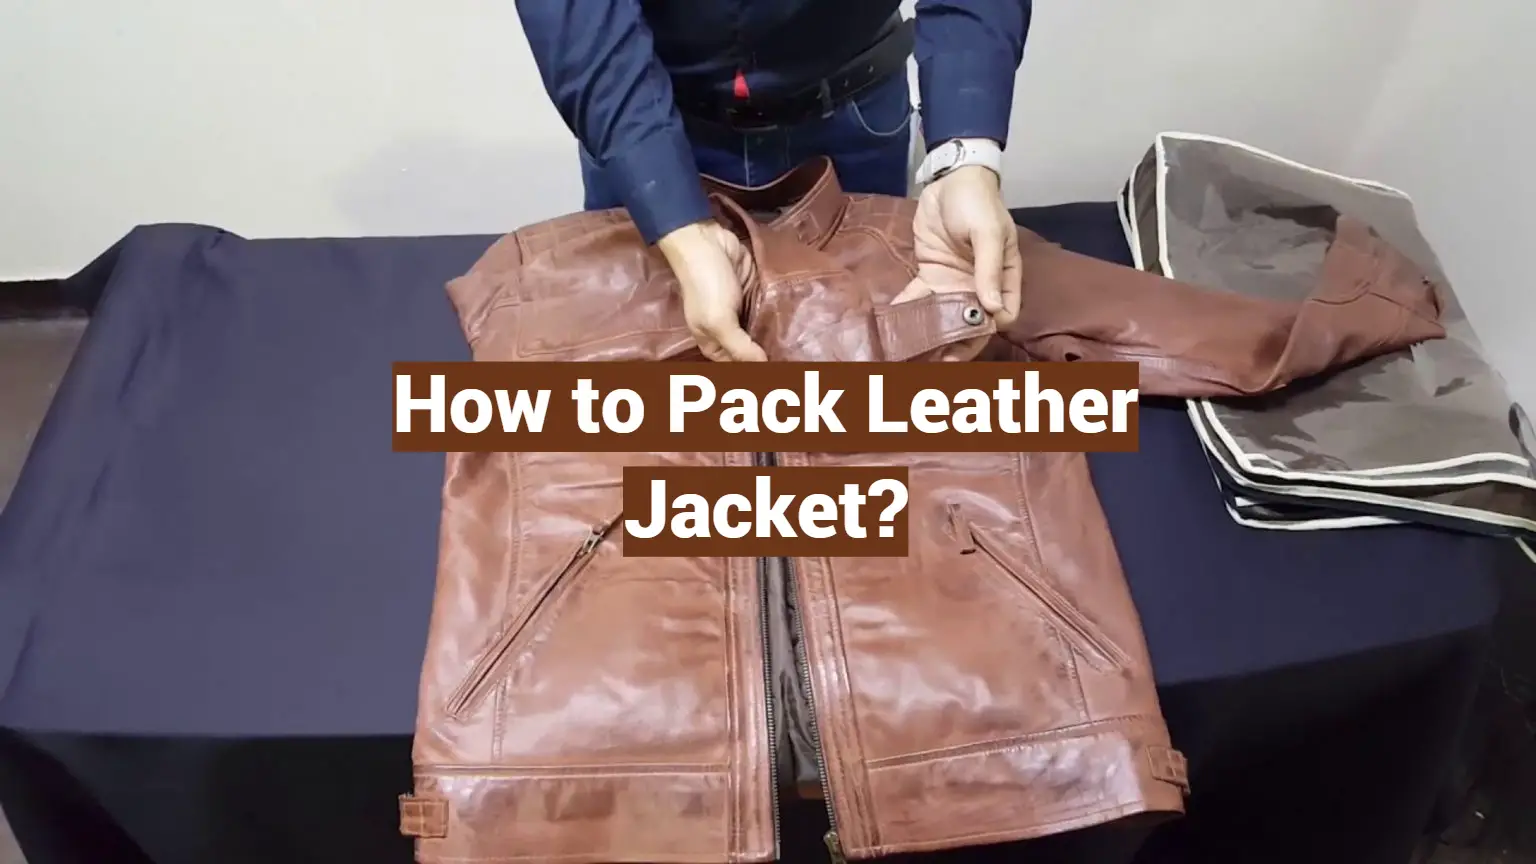 How to Pack Leather Jacket? - LeatherProfy